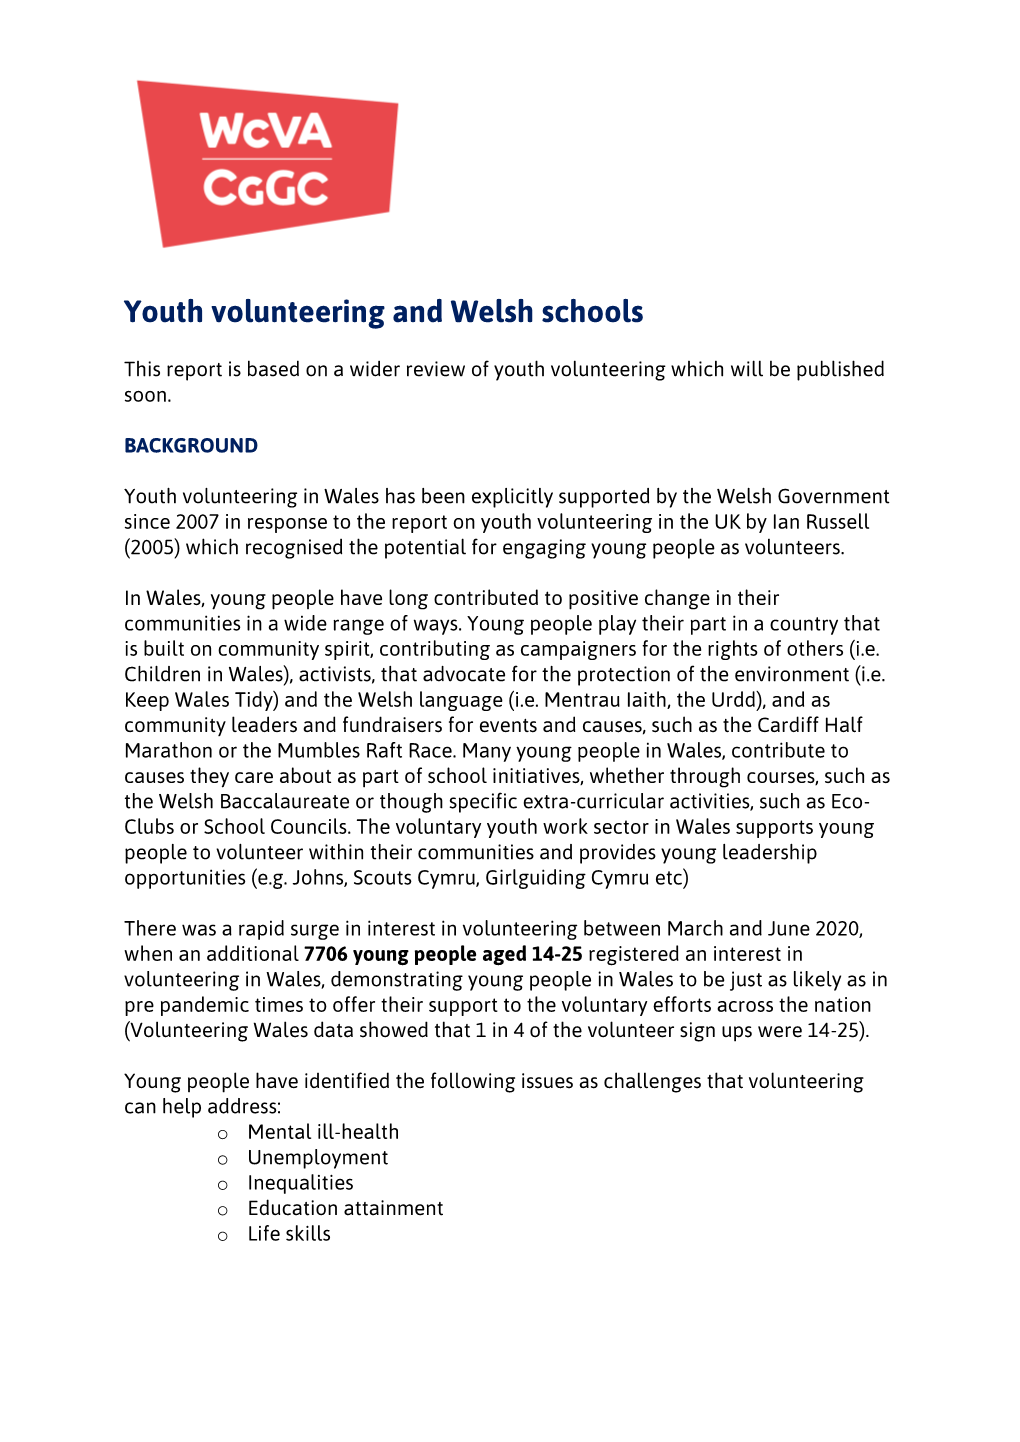 Youth Volunteering and Welsh Schools